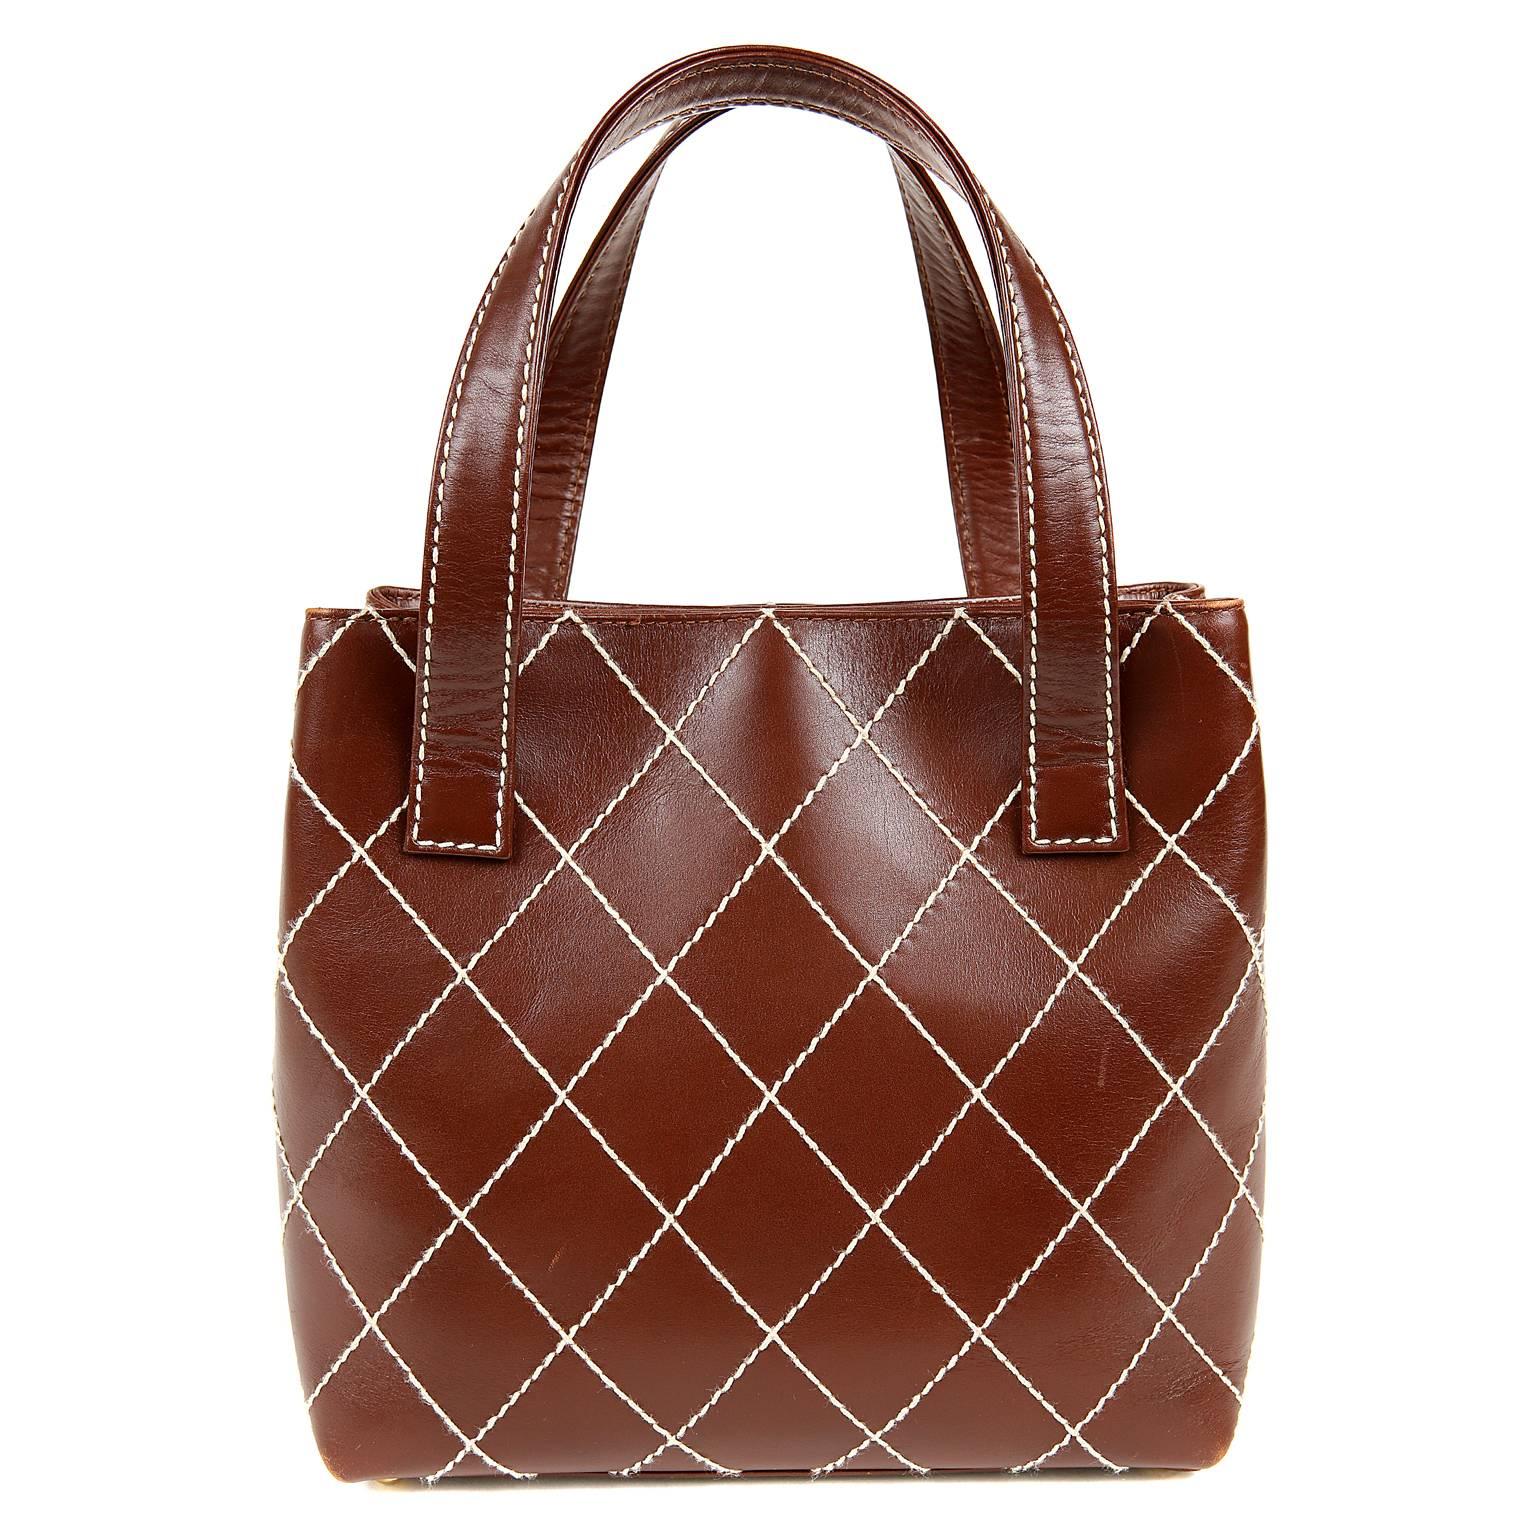 Chanel Brown Topstitched Day Bag- EXCELLENT
  Richly colored with contrasting stitching, it elevates an everyday bag to something special.

Russet brown leather is topstitched in signature Chanel diamond pattern with contrasting ivory thread. 